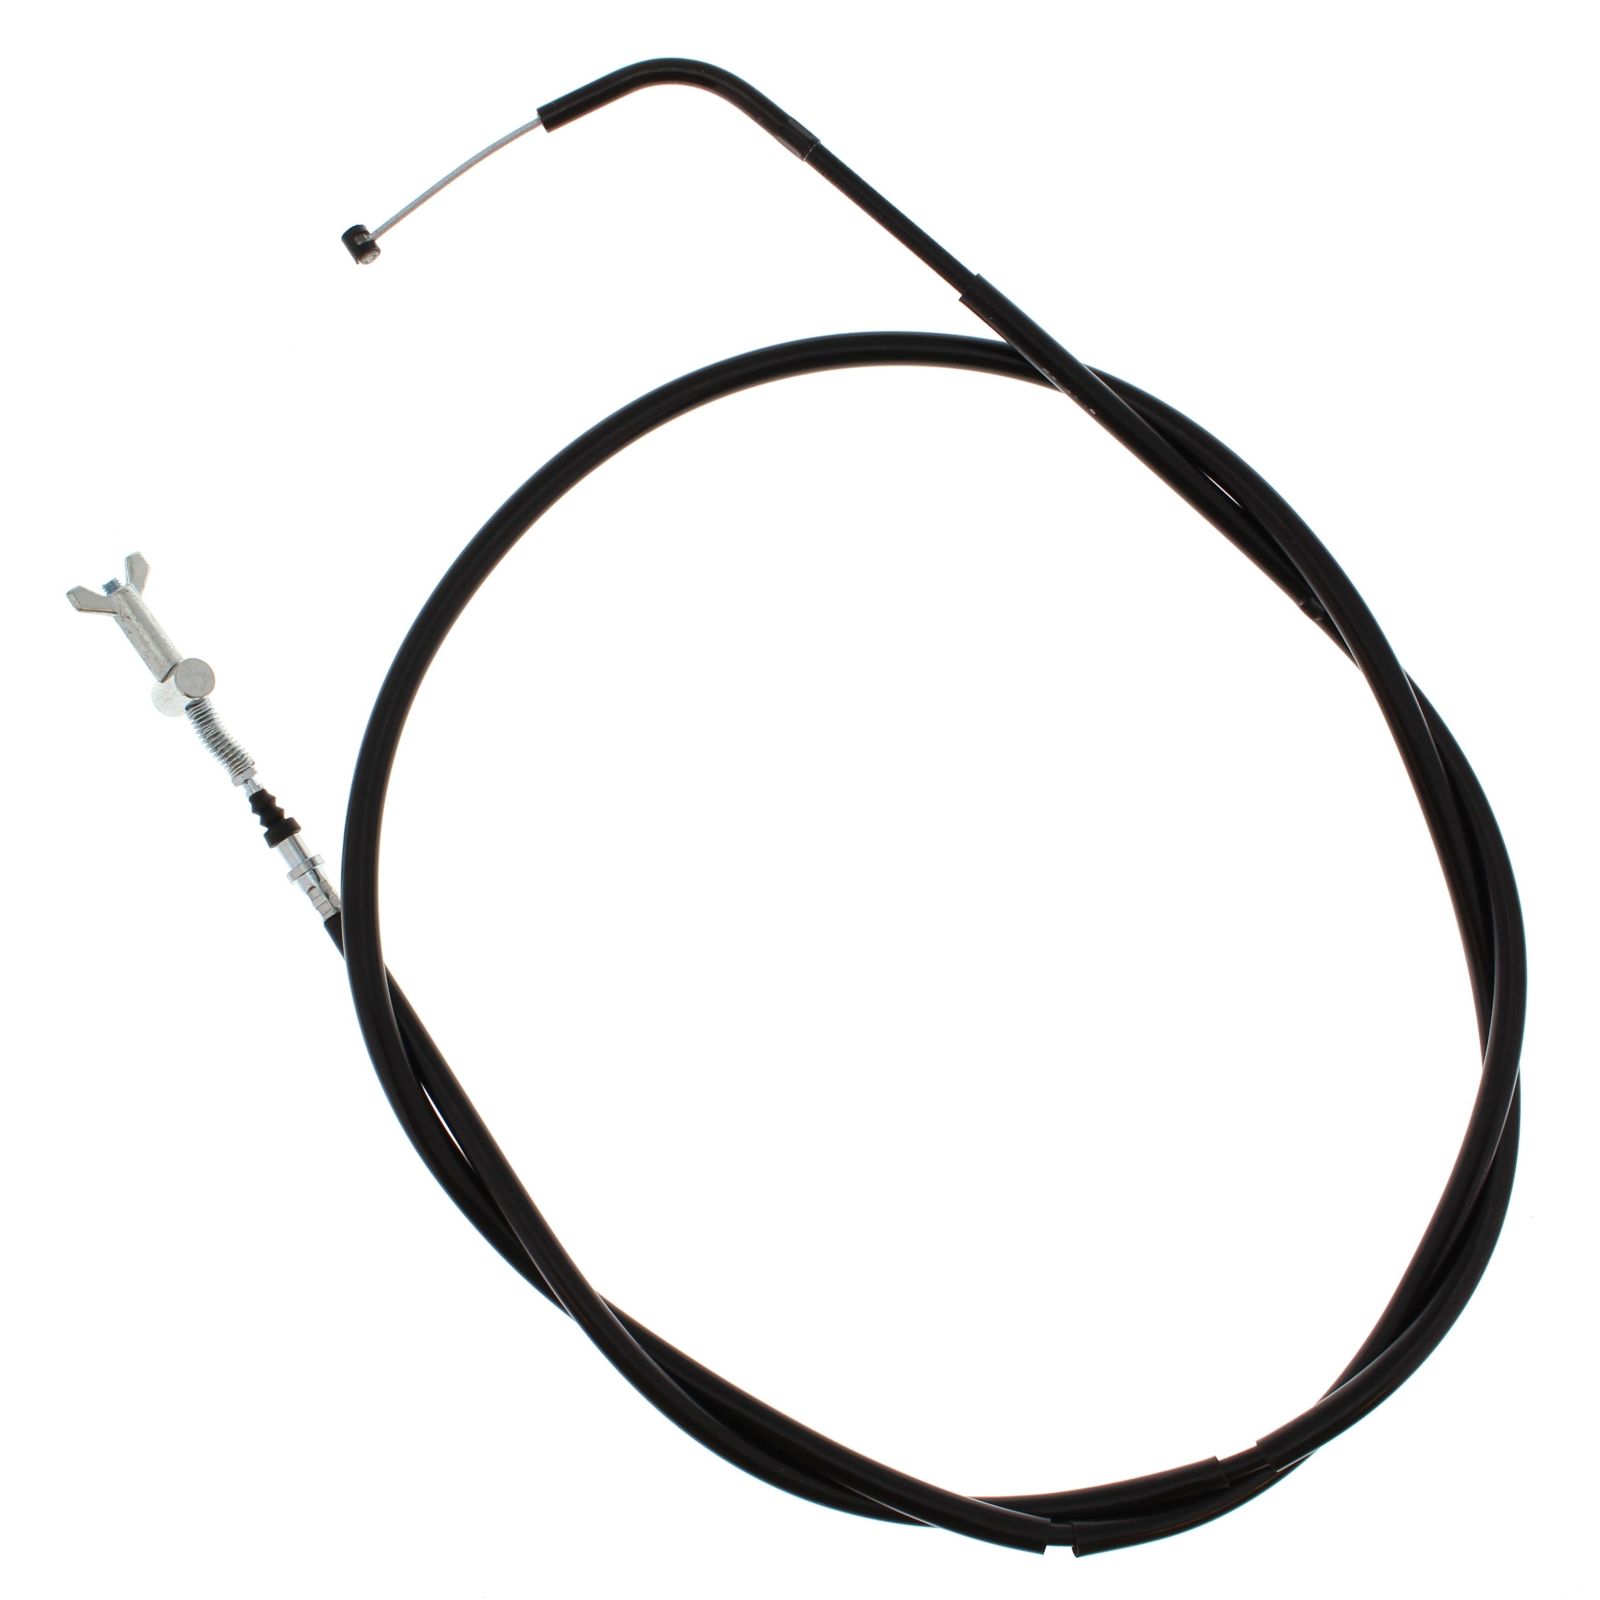 Wrp Brake Cables - WRP454069 image